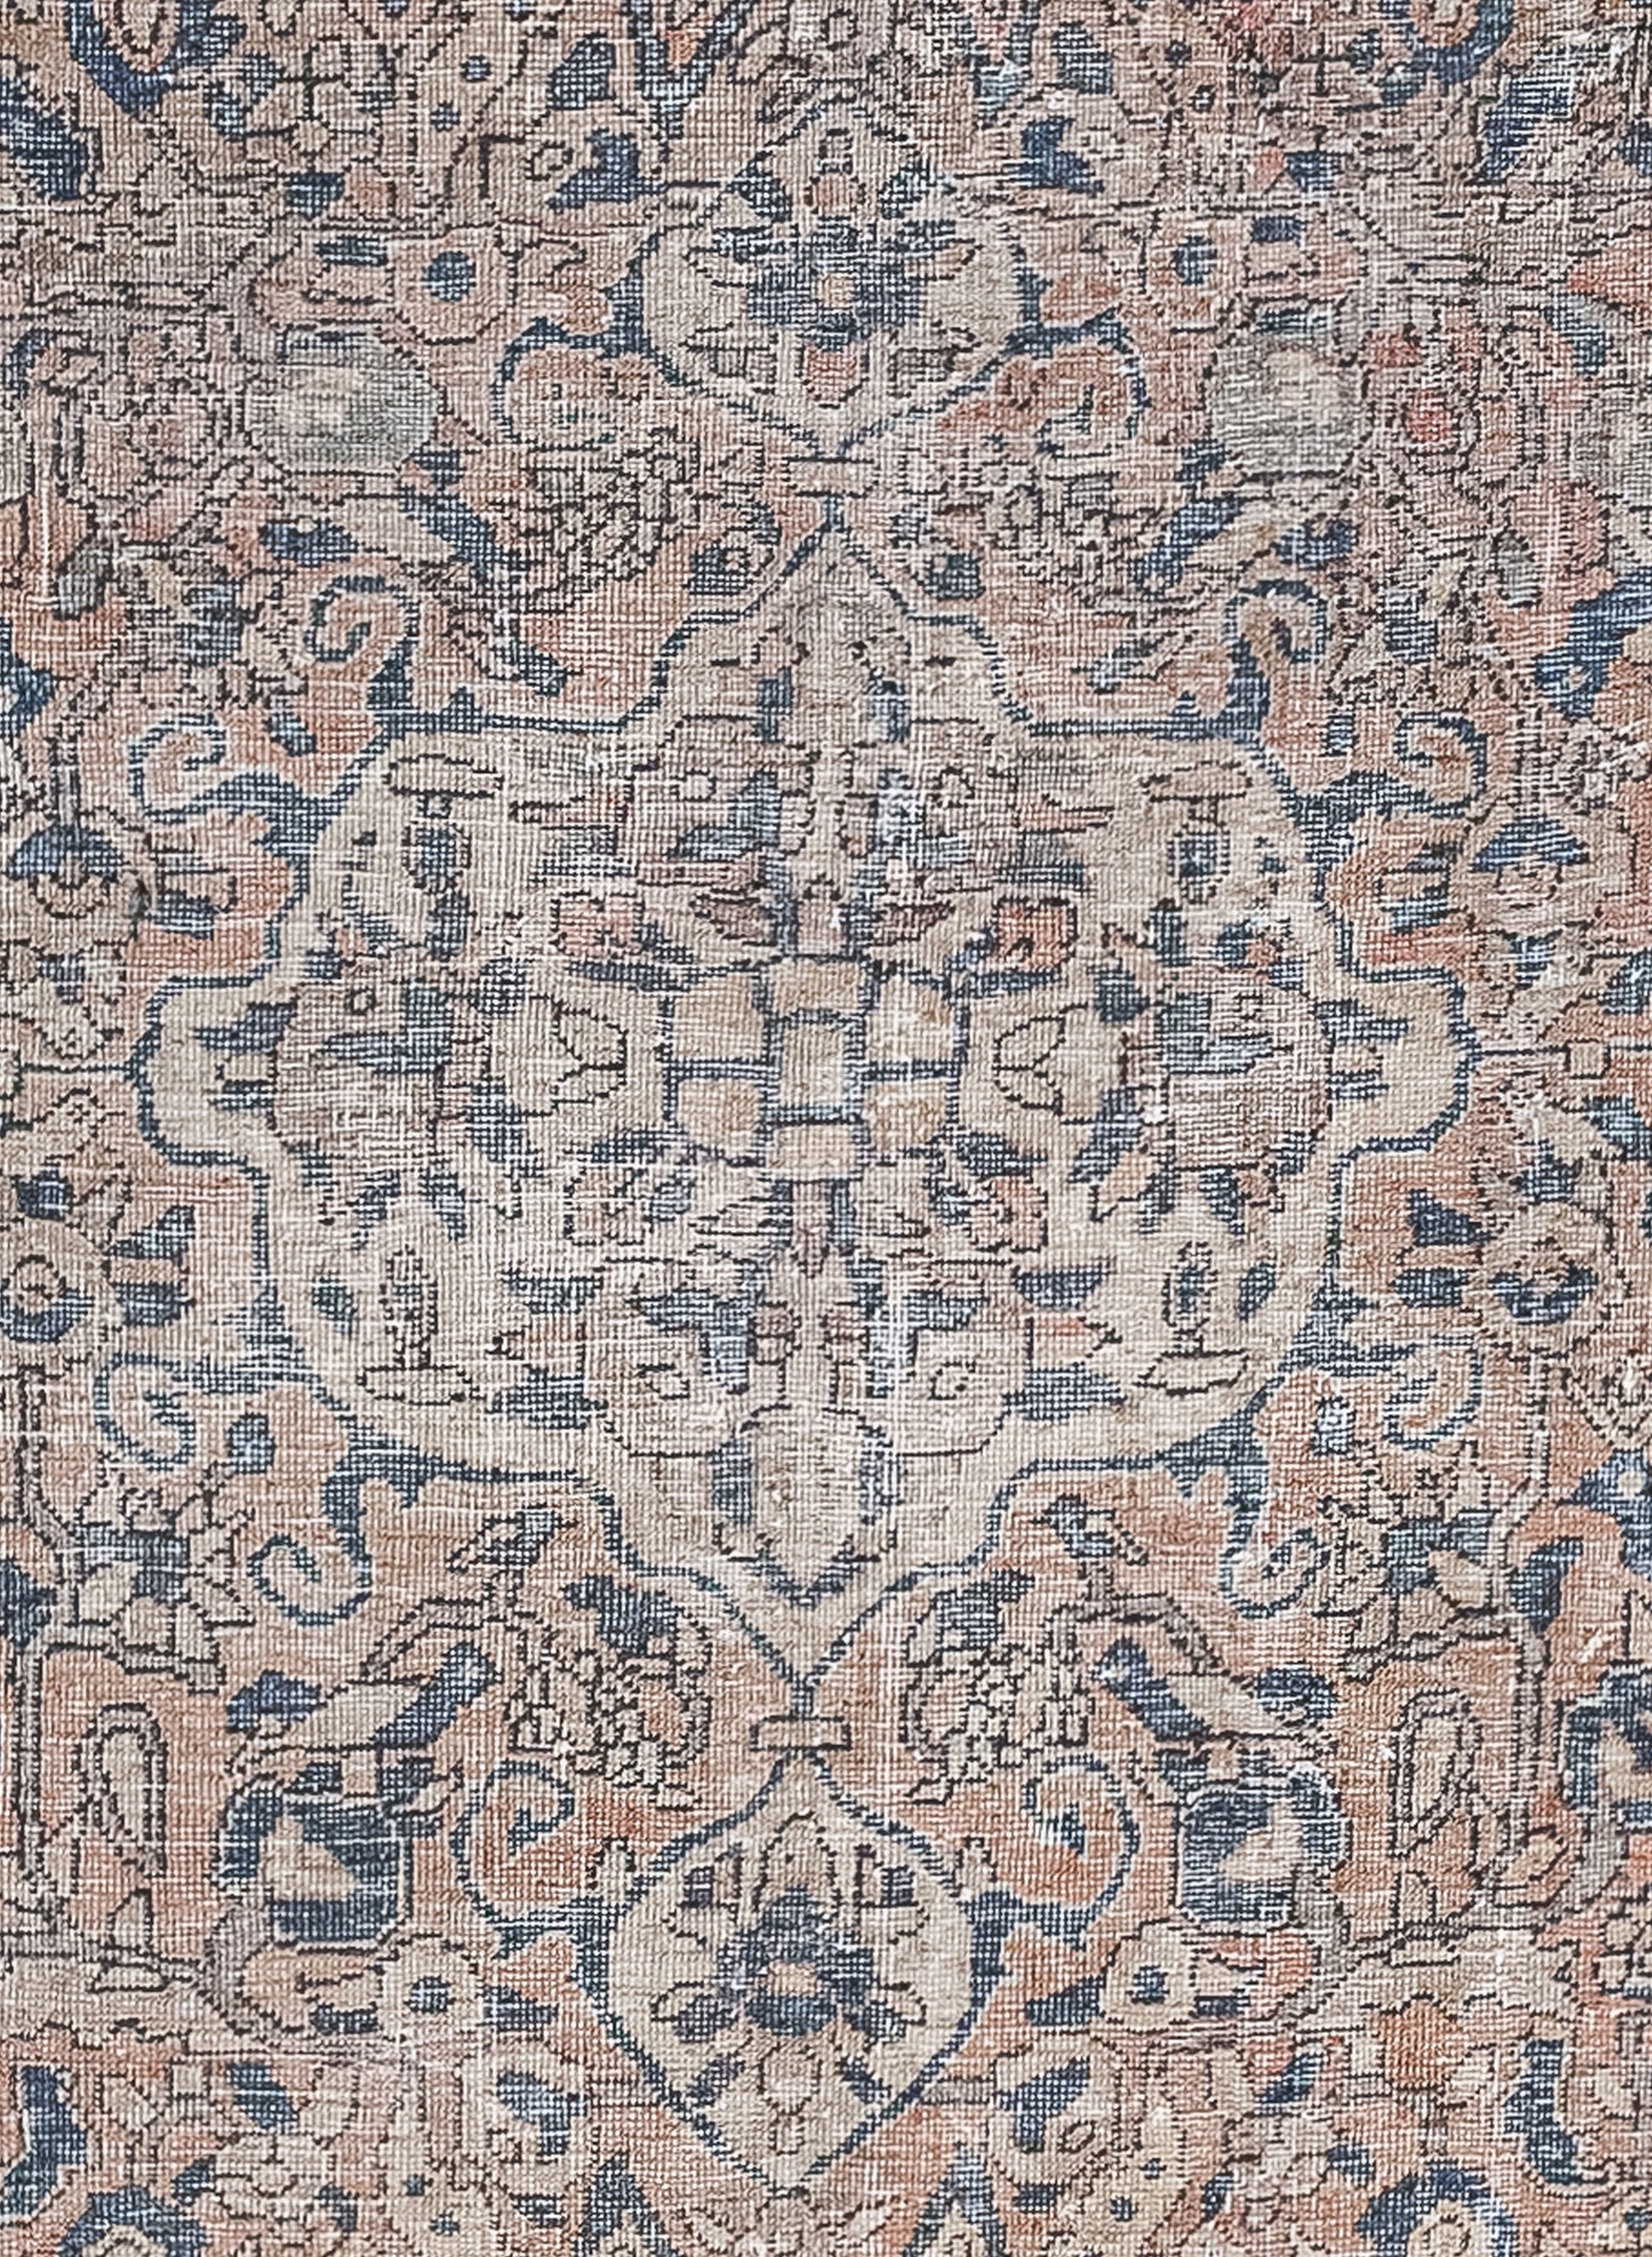 The rug's close-up displays an embellishment fused with two smaller ones at the top and bottom. This ornament is filled with geometric flowers, leaves, and abstract polygons.